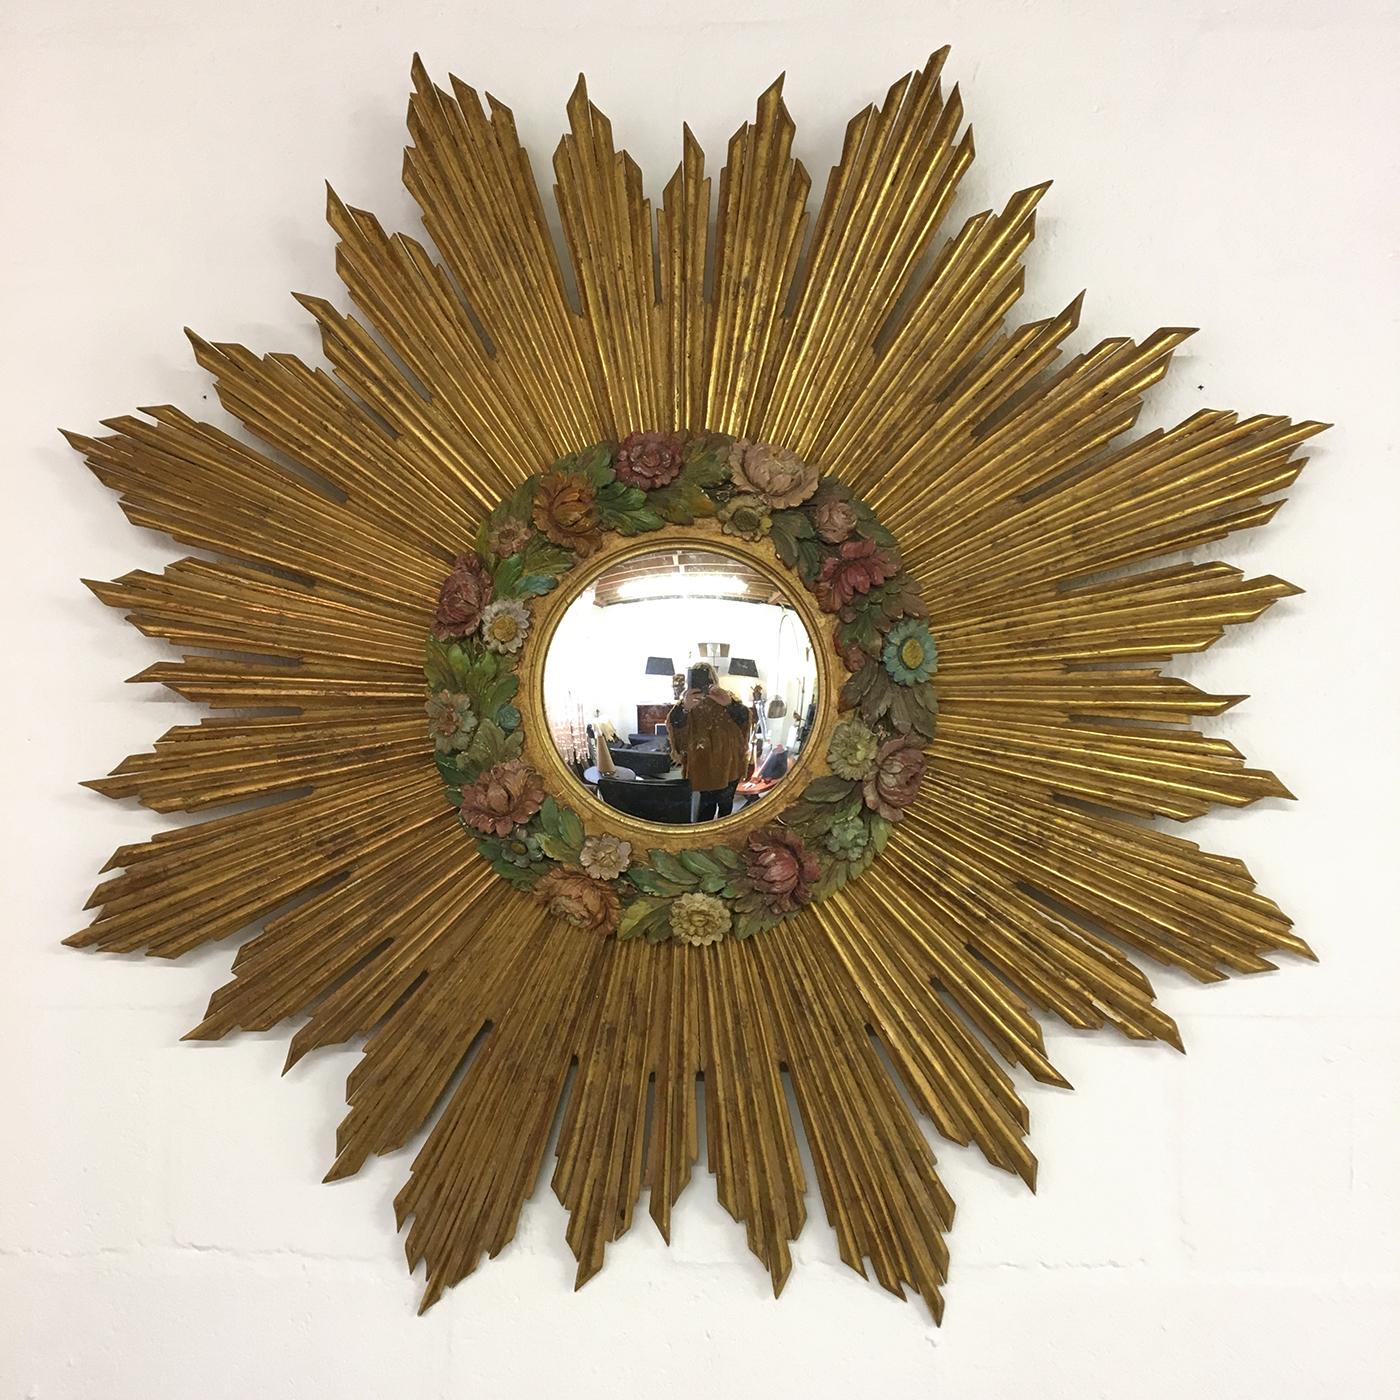 A magnificent and very large early to mid-20th century French gilded and carved wood sunburst with a convex mirror, featuring a beautiful carved and highly decorative wood polychrome Barbola wreath of flowers – which was a trend in the